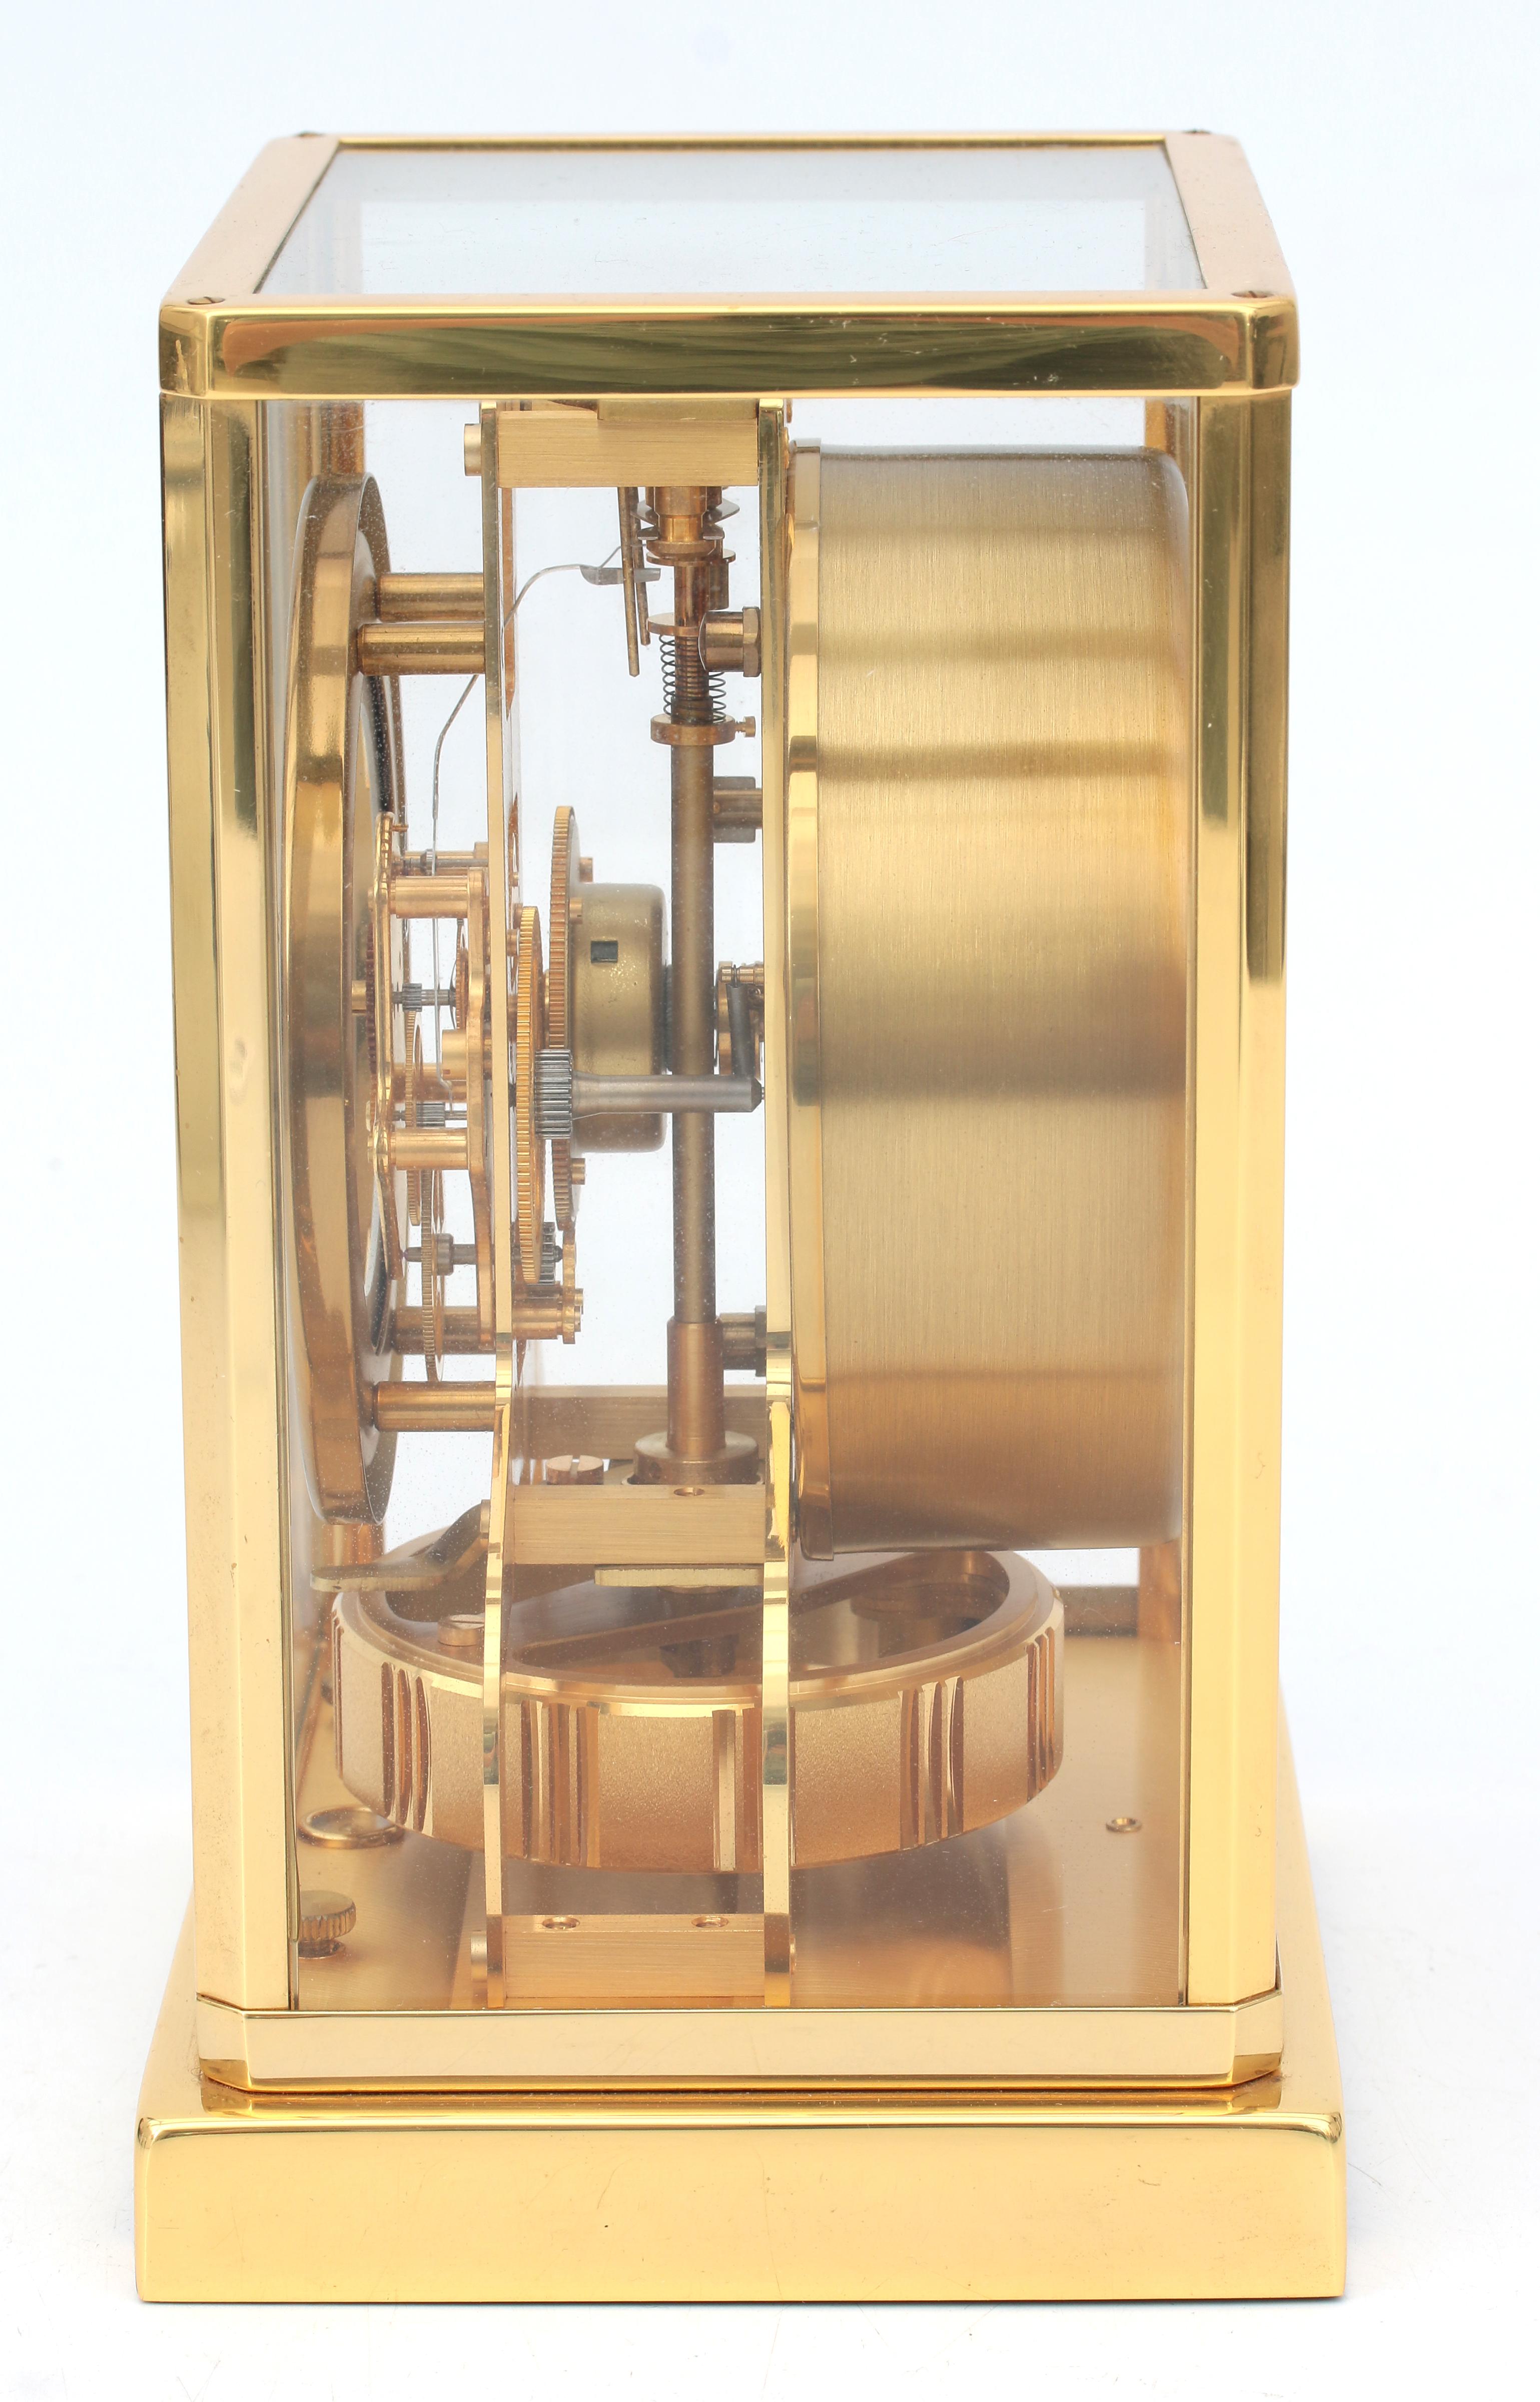 A perpetuum moving clock in gold-plated metal and glass case, Jaeger leCoultre, Swizerland, circa 19 - Image 3 of 5